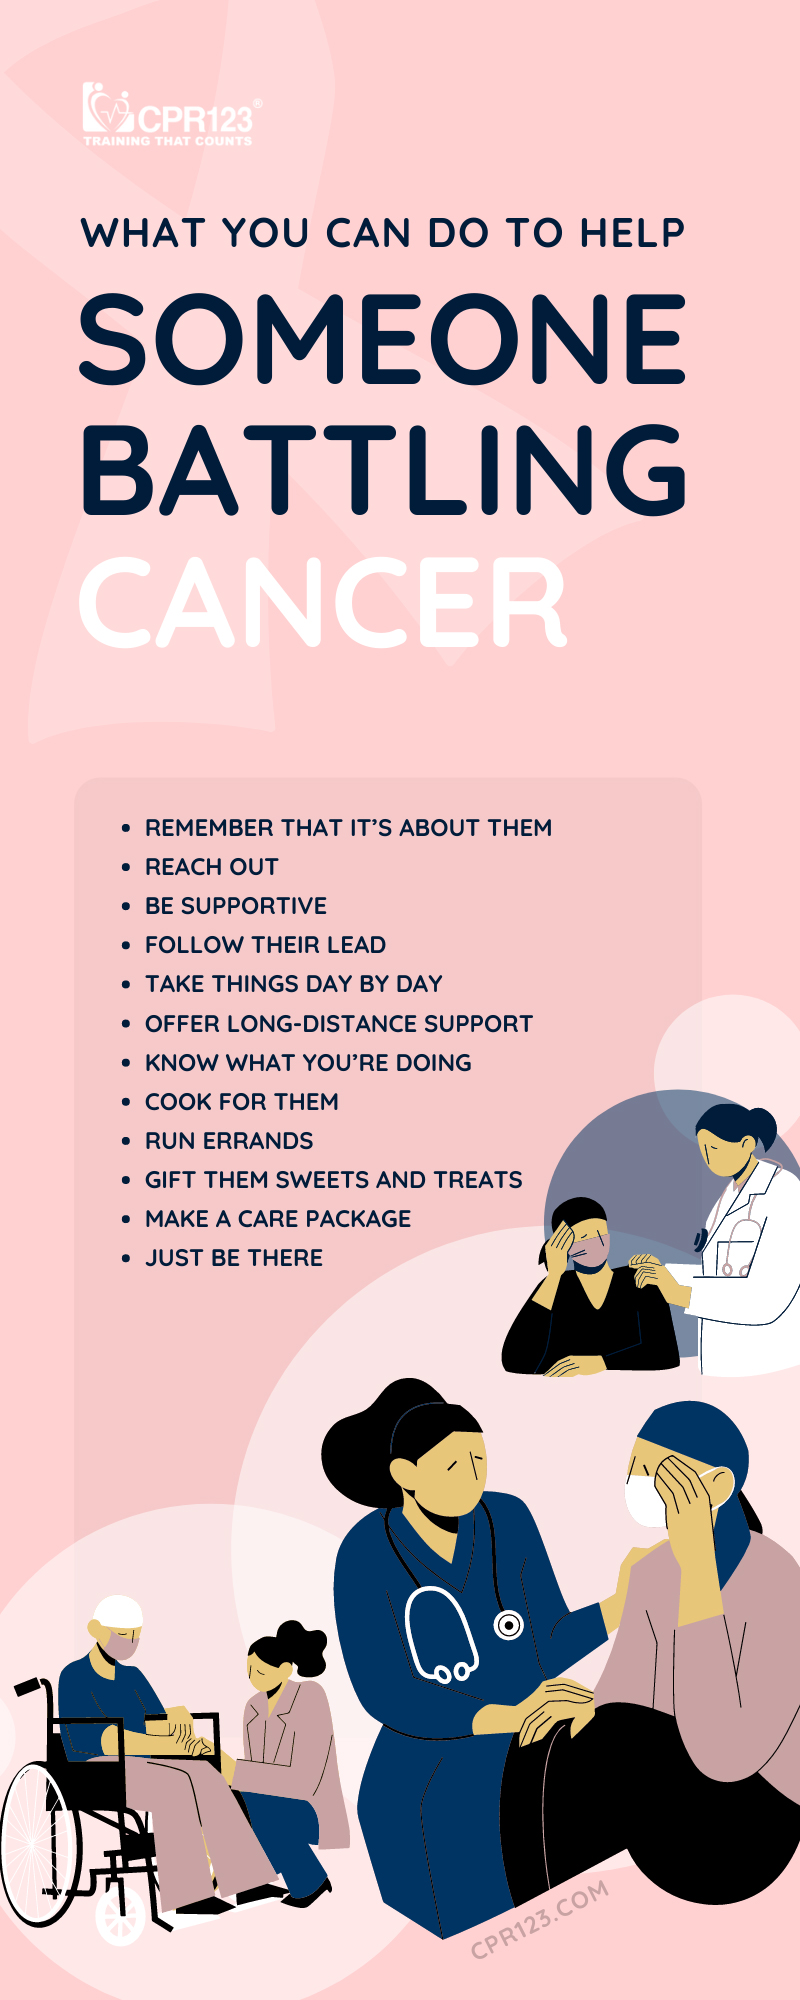 What You Can Do To Help Someone Battling Cancer